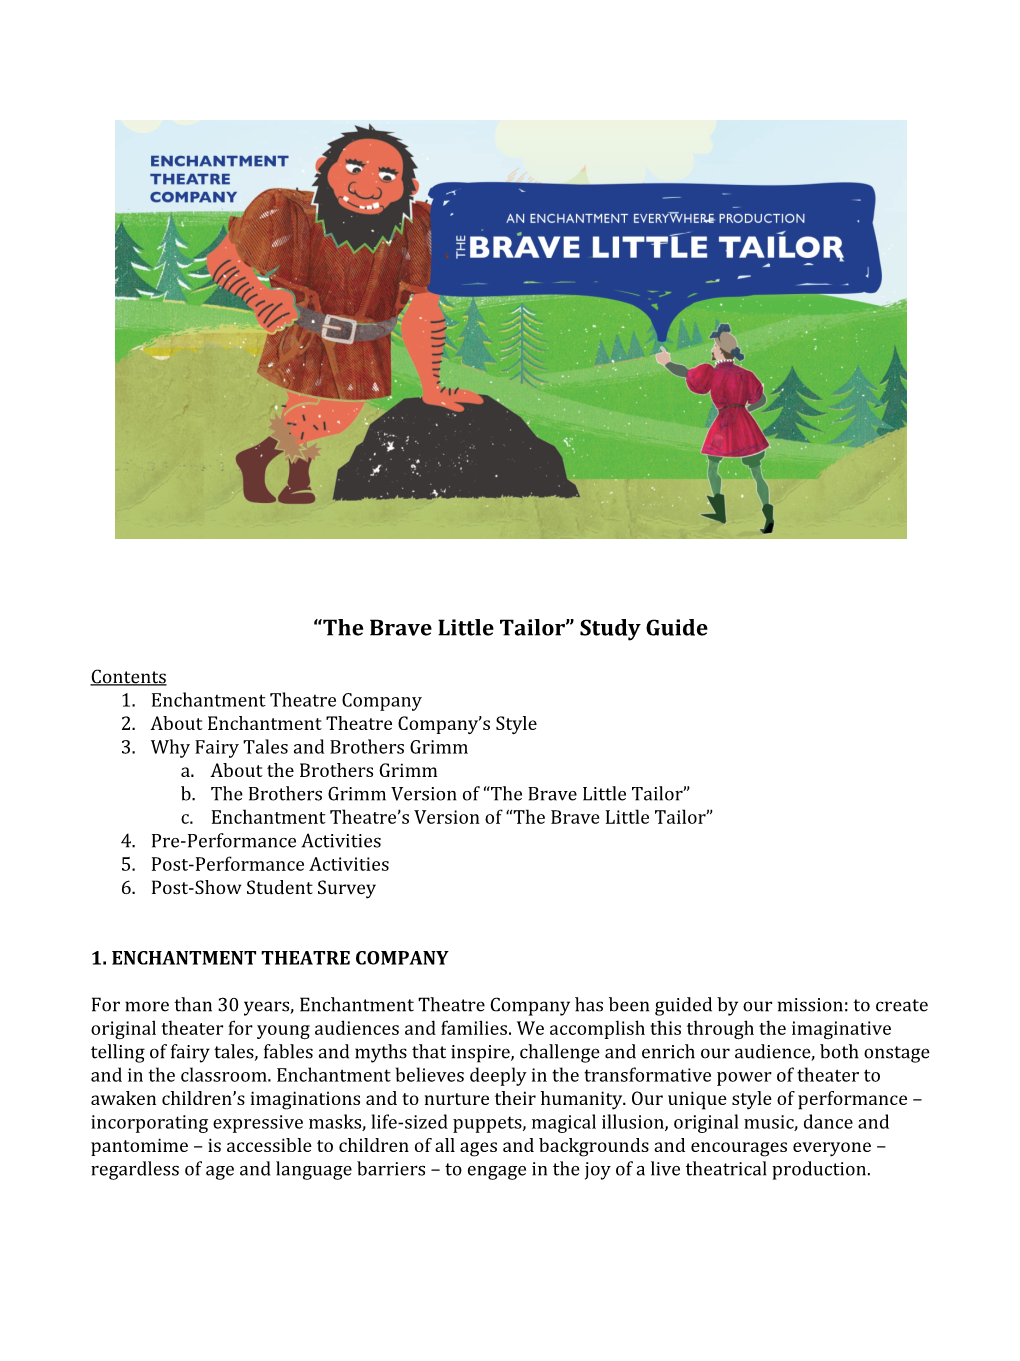 The Brave Little Tailor” Study Guide